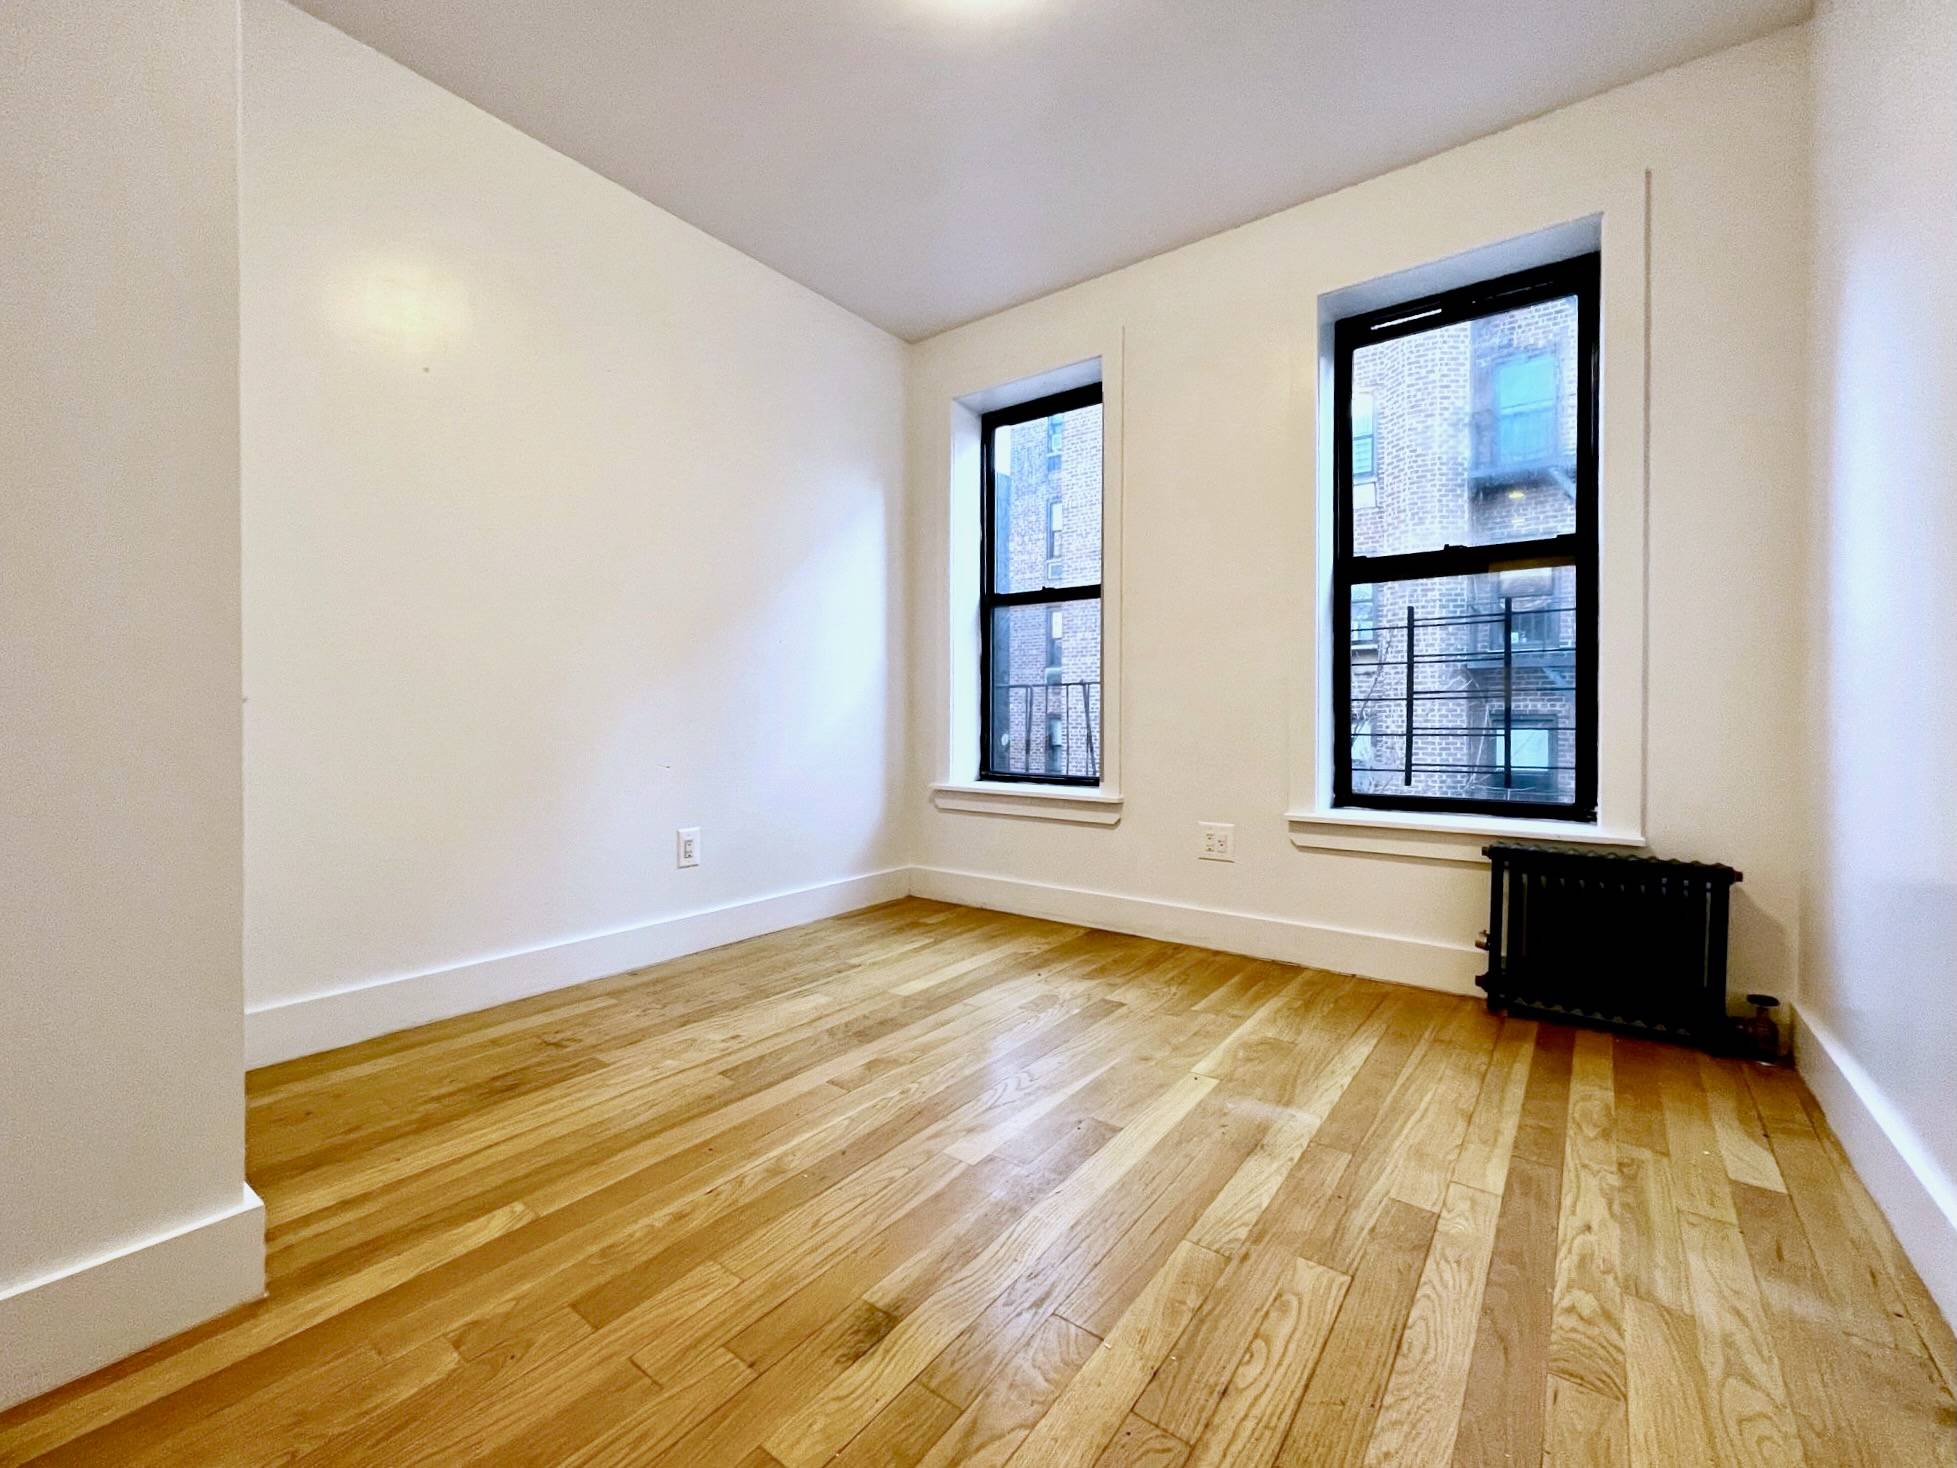 Location Nagle at Broadway Cloisters 3bed with washer dryer in unit.